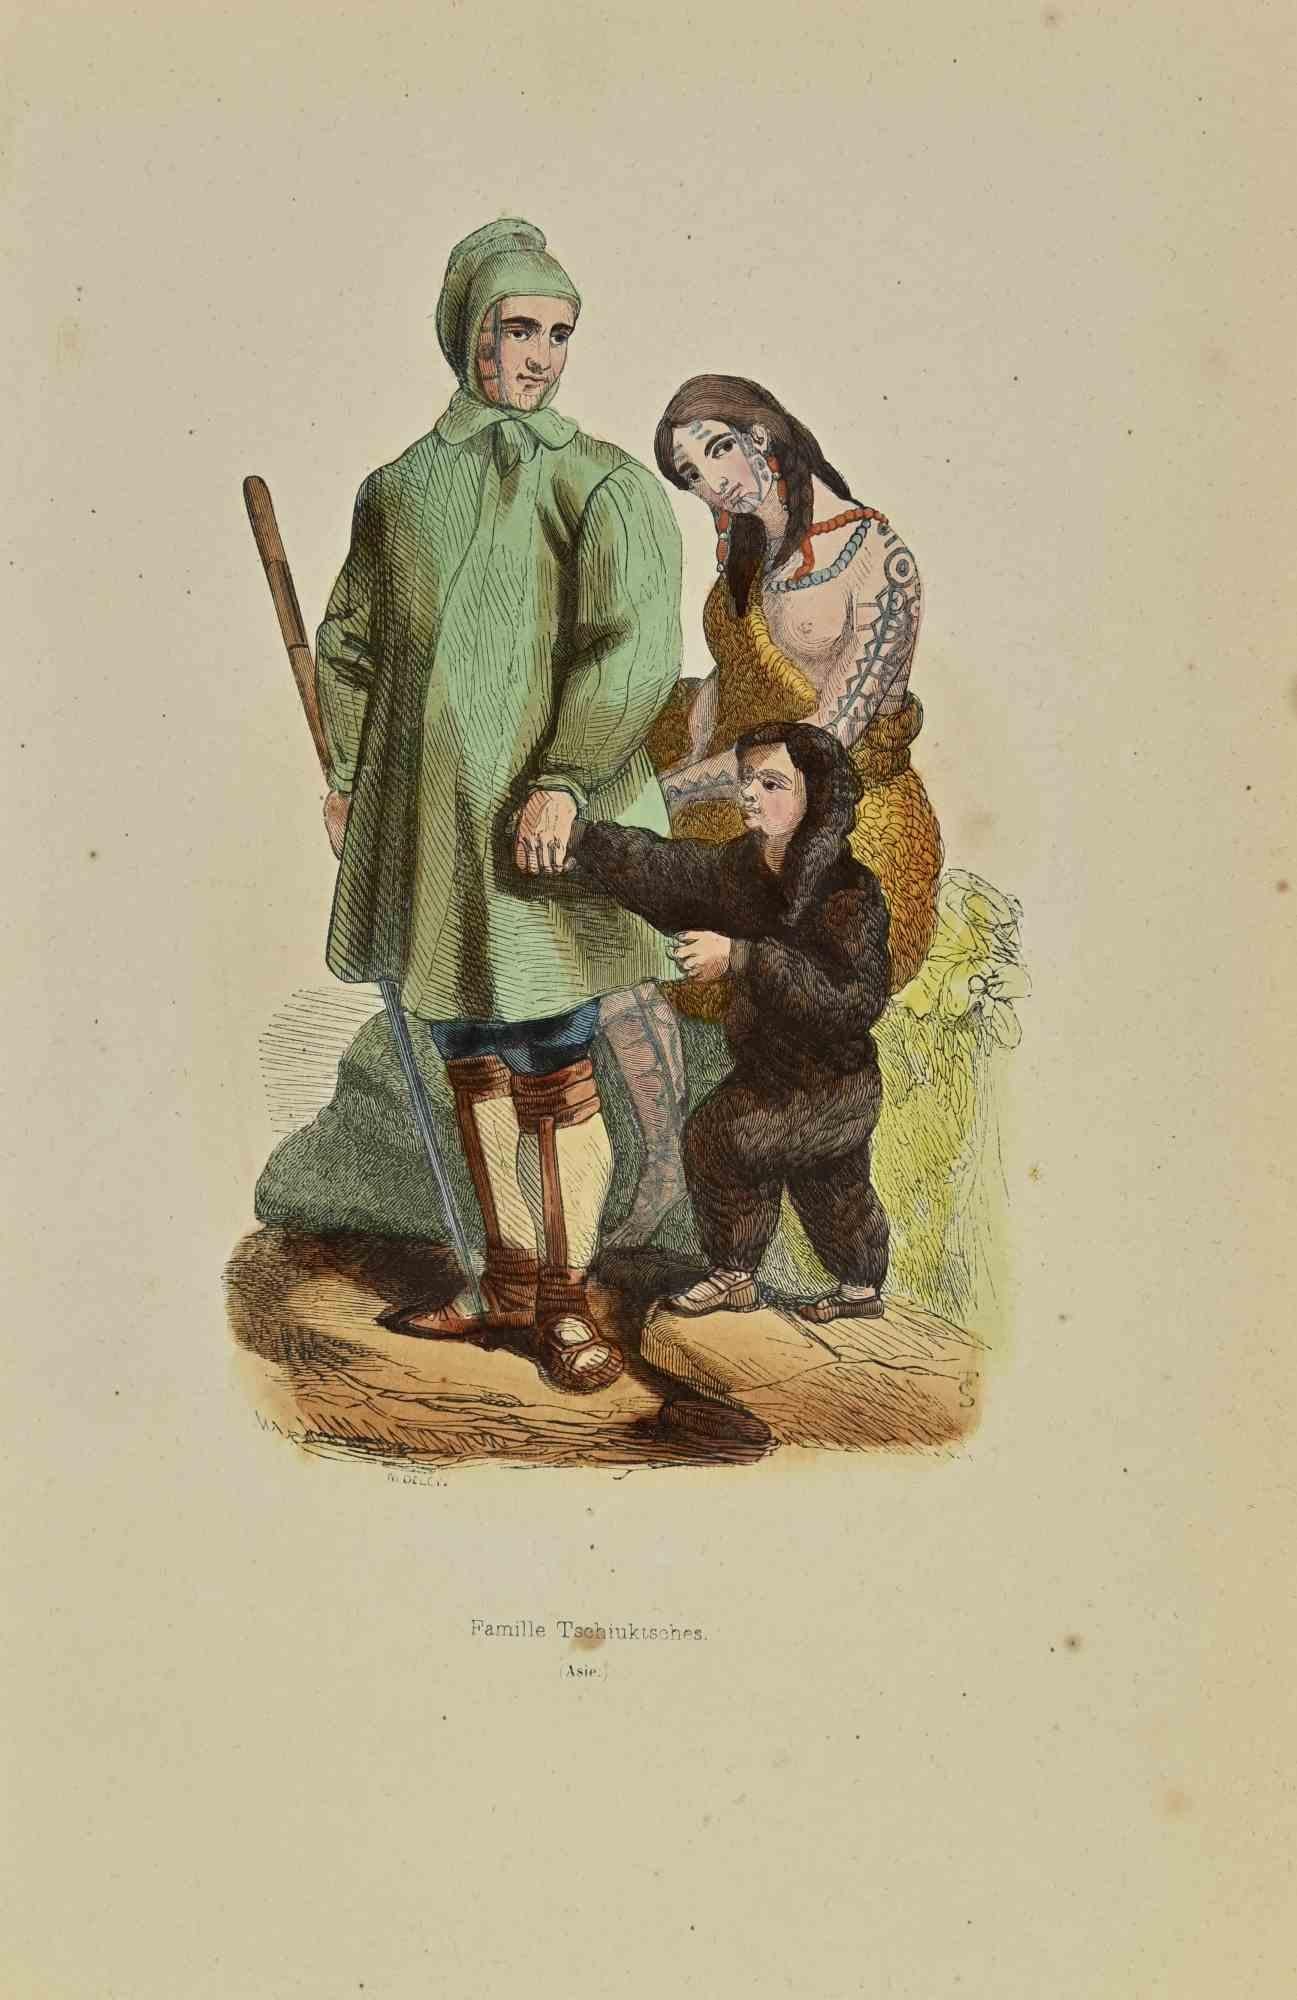 Tschiuktsches Family is a lithograph made by Auguste Wahlen in 1844.

Hand colored.

Good condition.

At the center of the artwork is the original title "Famille Tschiuktsches".

The work is part of Suite Moeurs, usages et costumes de tous les